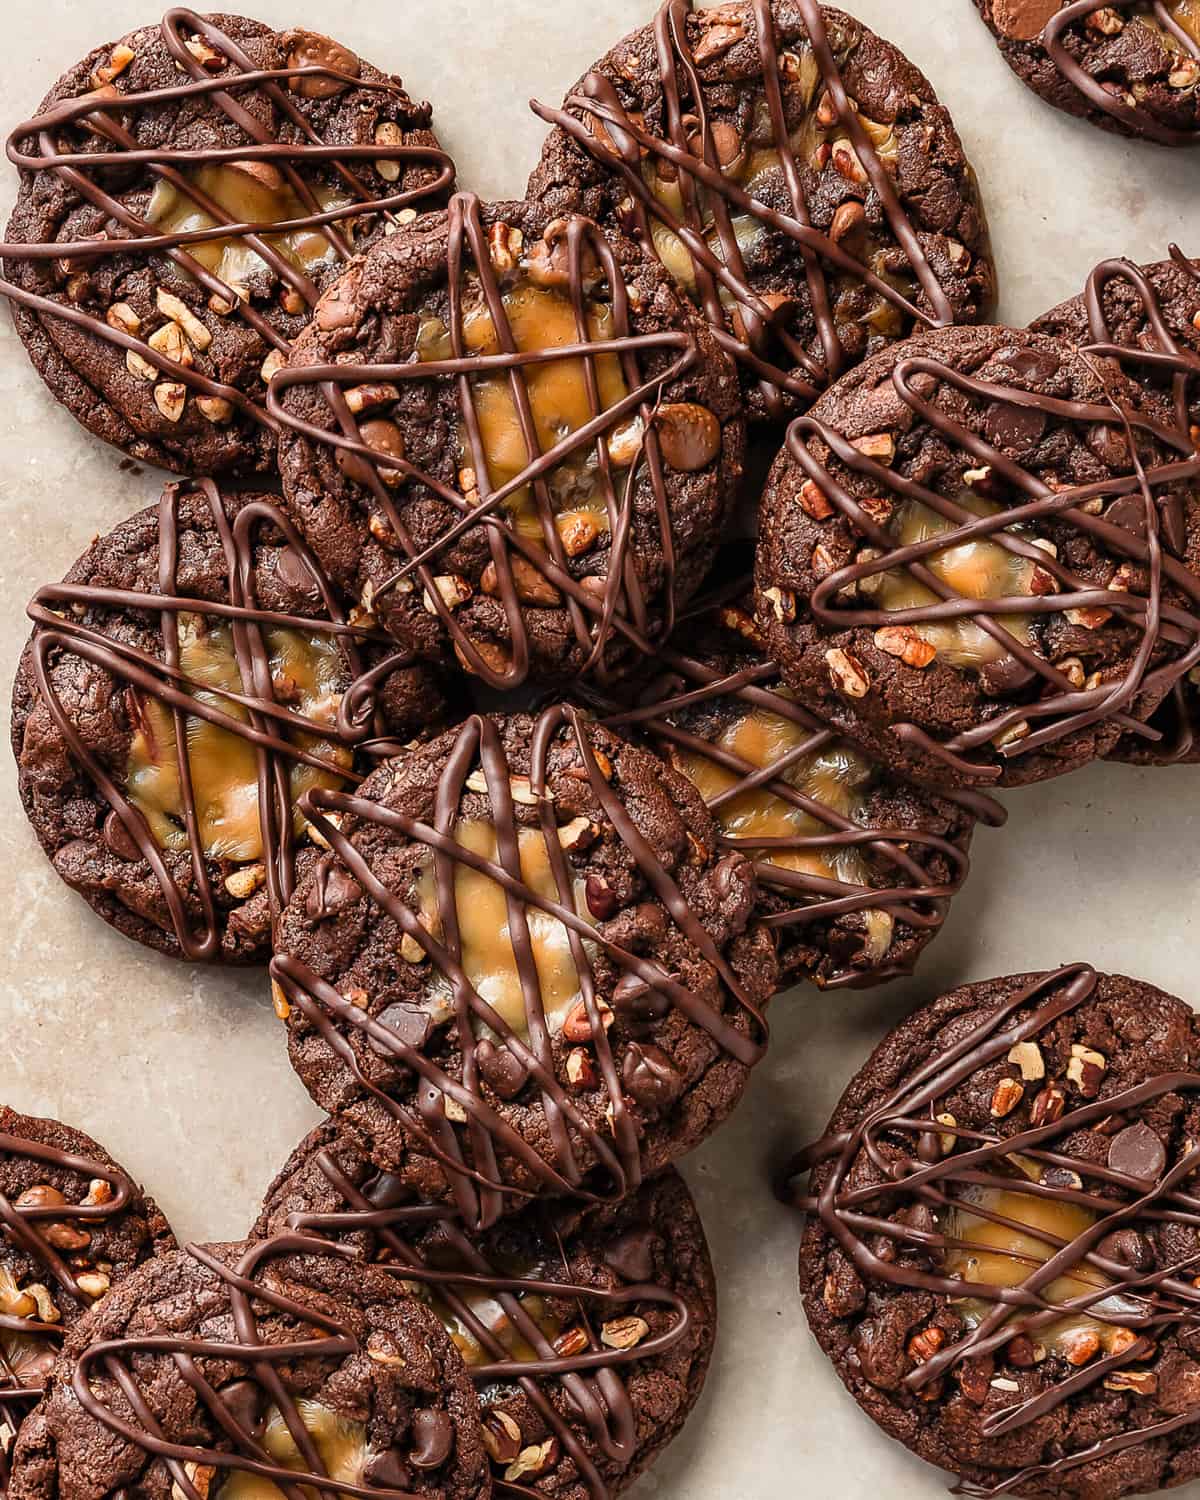 Turtle cookies are soft and chewy chocolate cookies filled with chopped pecans, pockets of melted caramel and gooey chocolate chips. These pecan turtle cookies are topped with more caramel and a drizzle of melted chocolate. Delight everyone with a batch of these easy to make chocolate caramel pecan cookies.